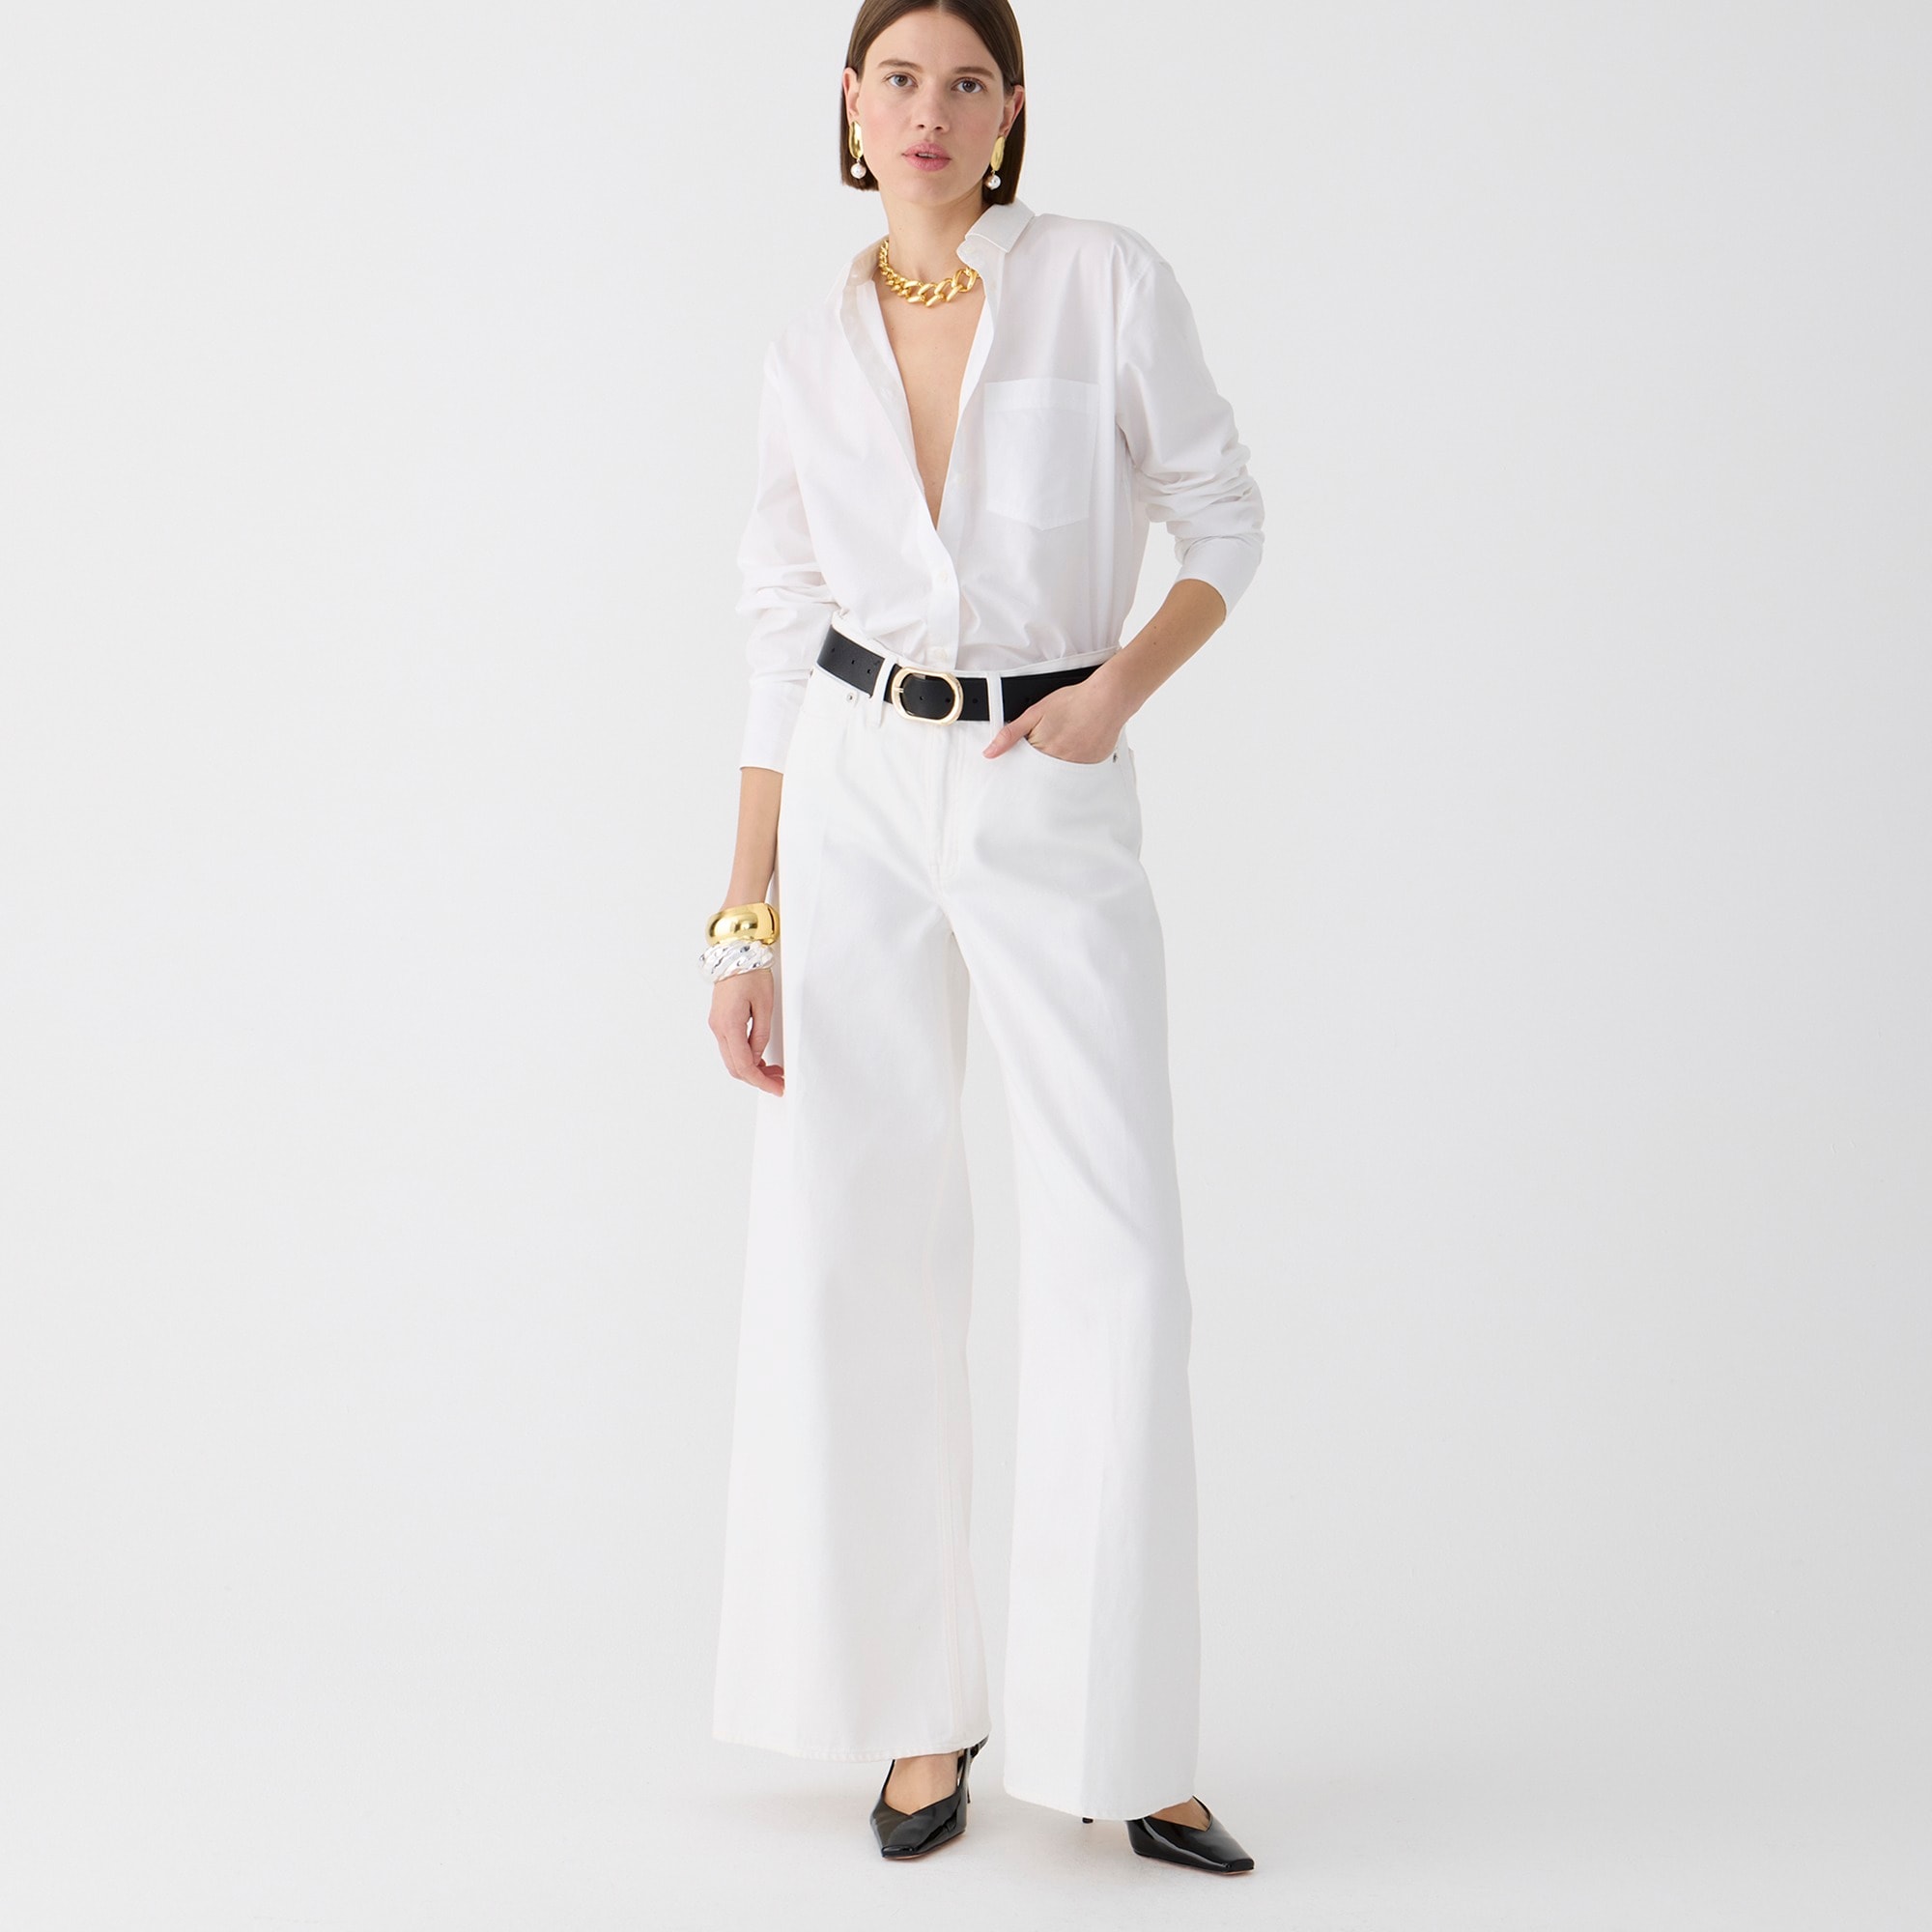  High-rise superwide-leg jean in white